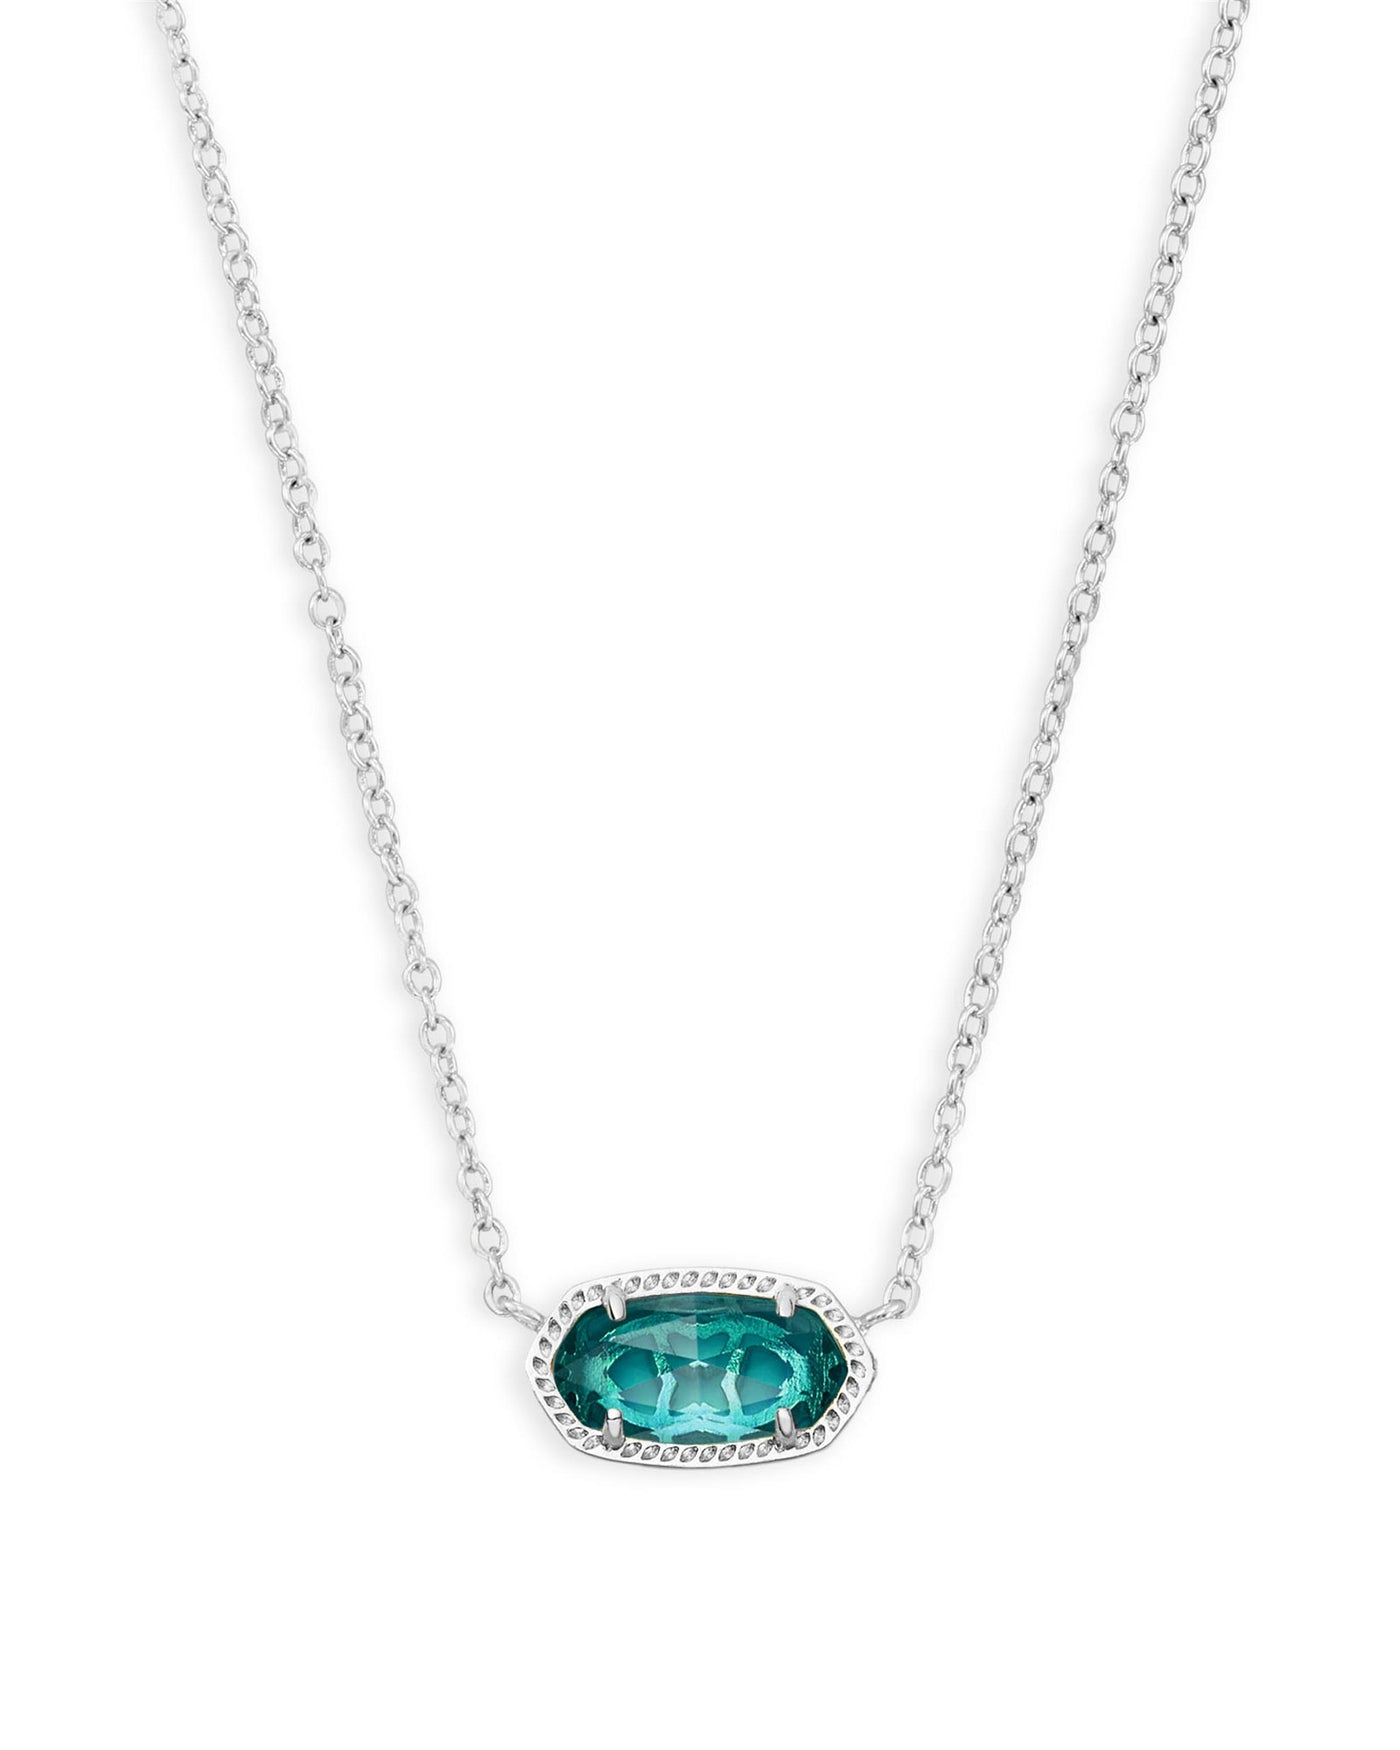 Silver Tone Necklace Featuring London Blue Dichroic Glass by Kendra Scott